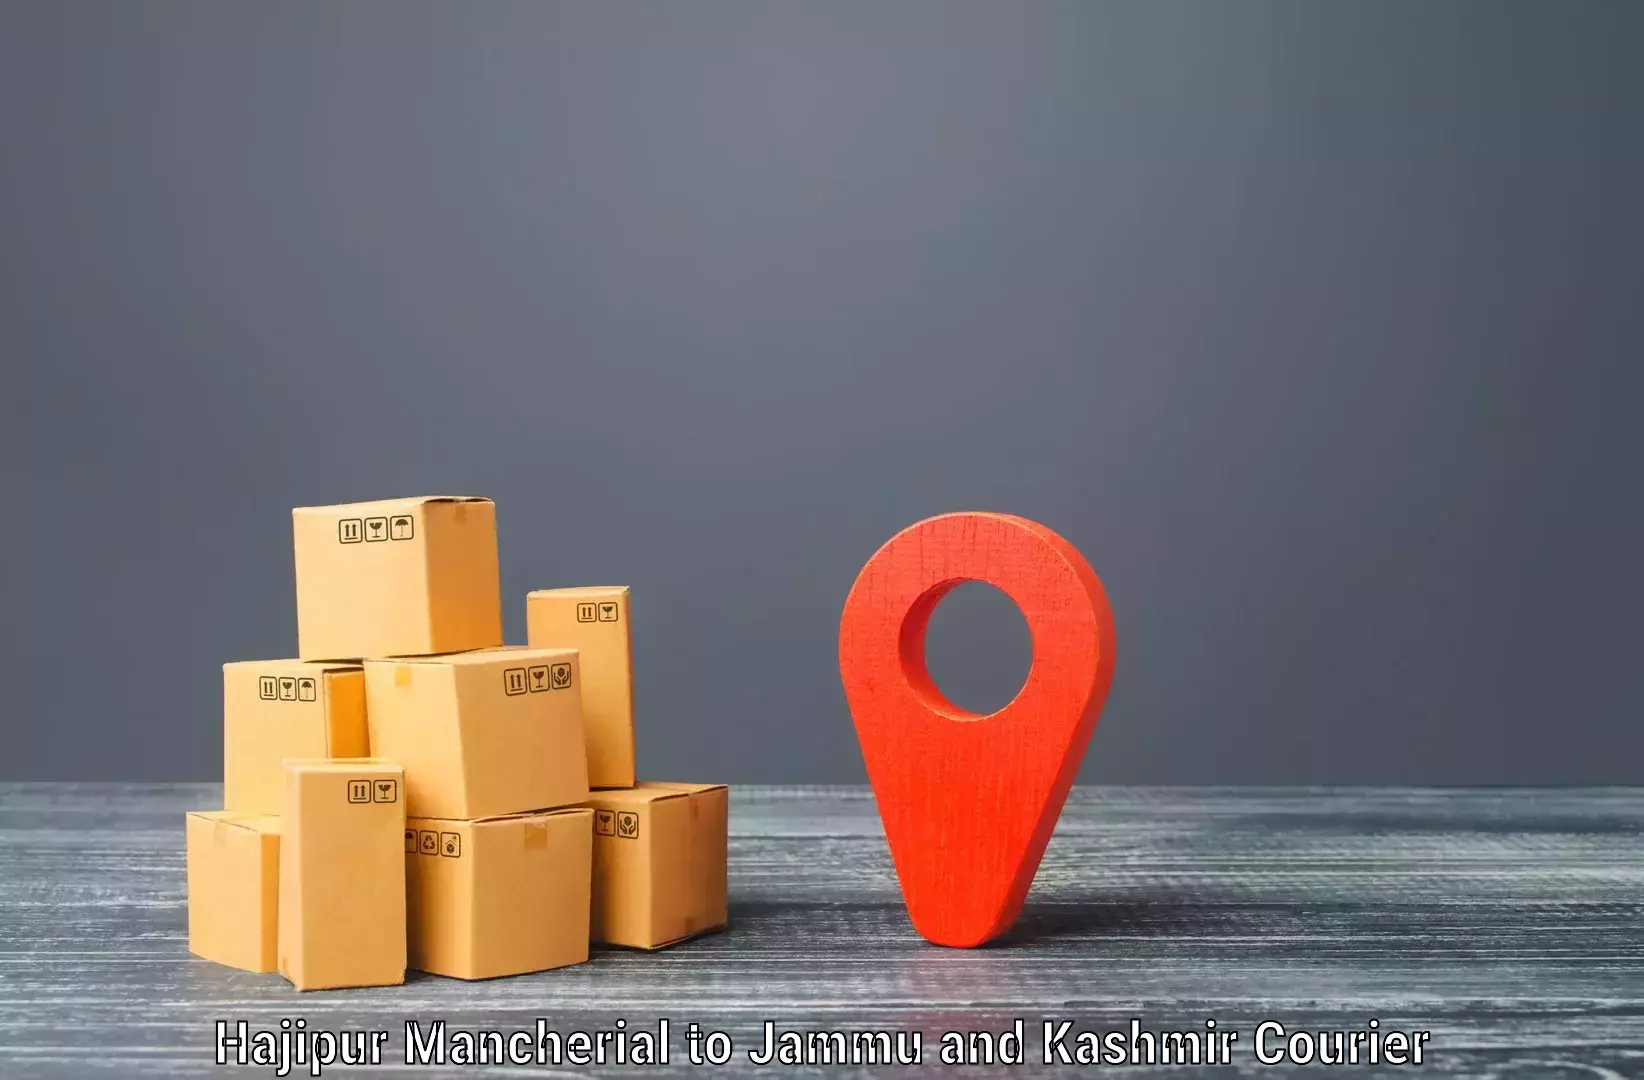 Reliable delivery network Hajipur Mancherial to Katra